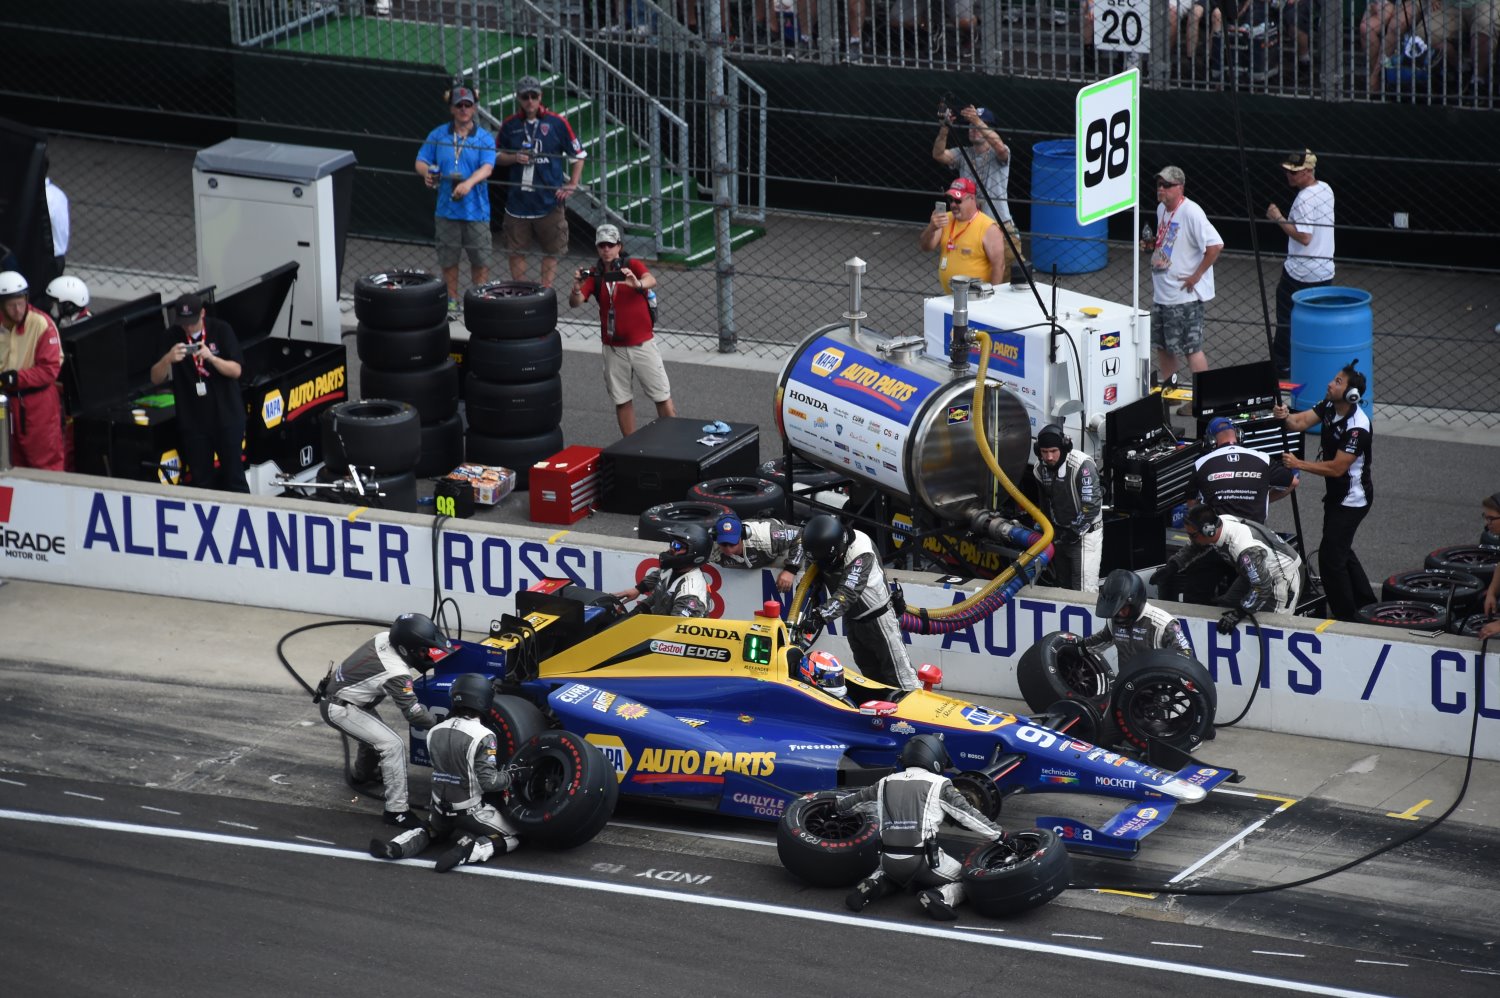 Fuel hose issues caused Rossi to have two slow pitstops, but he drove like a demon back through the field.